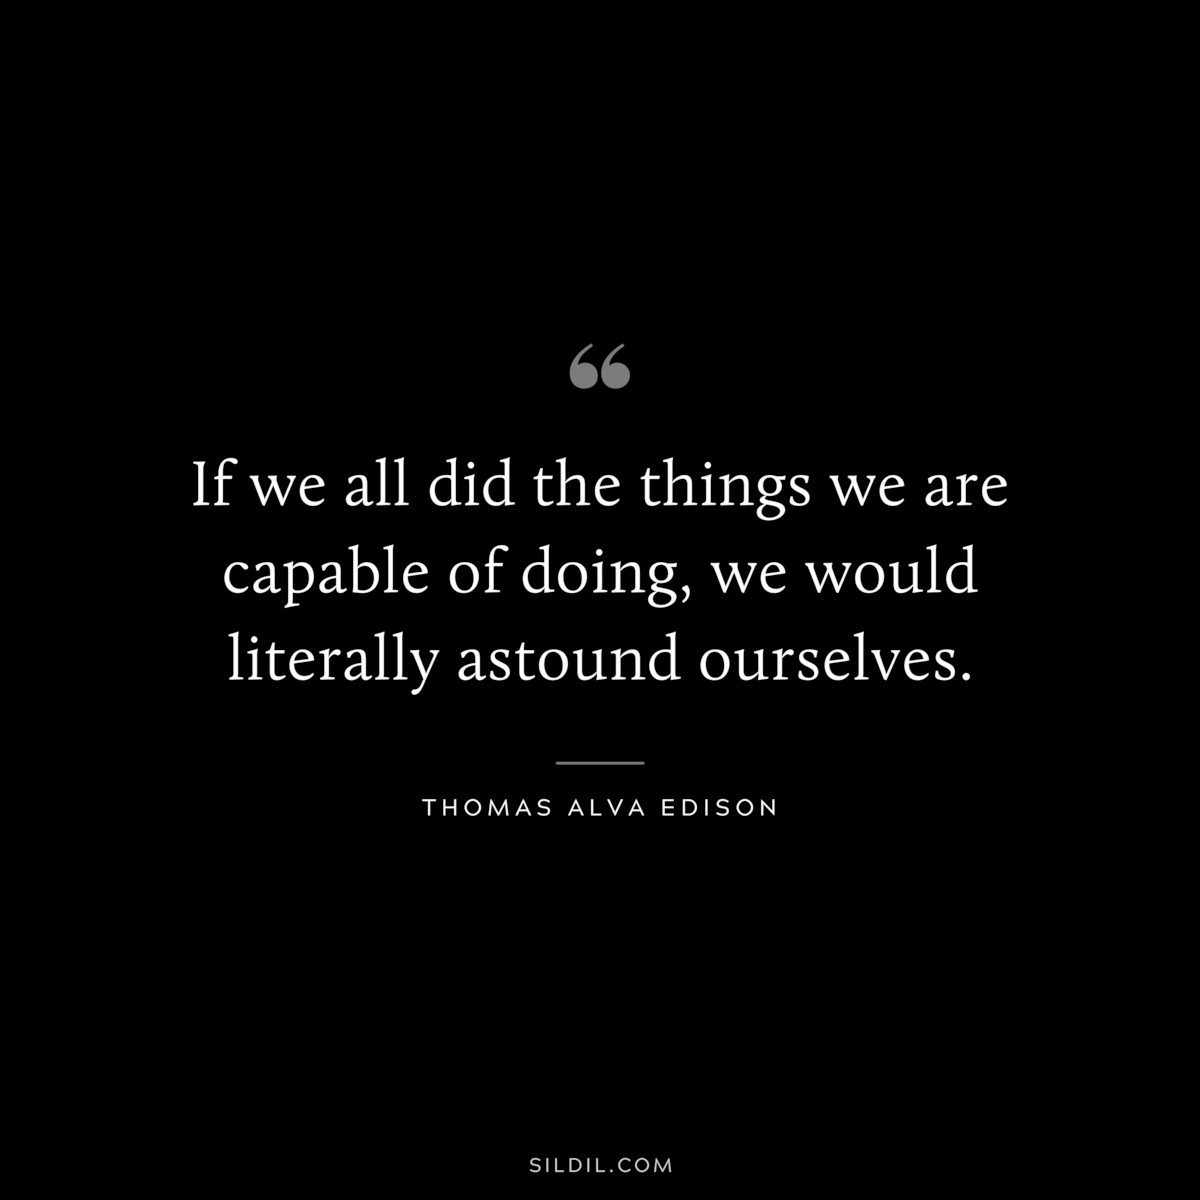 If we all did the things we are capable of doing, we would literally astound ourselves. ― Thomas Alva Edison